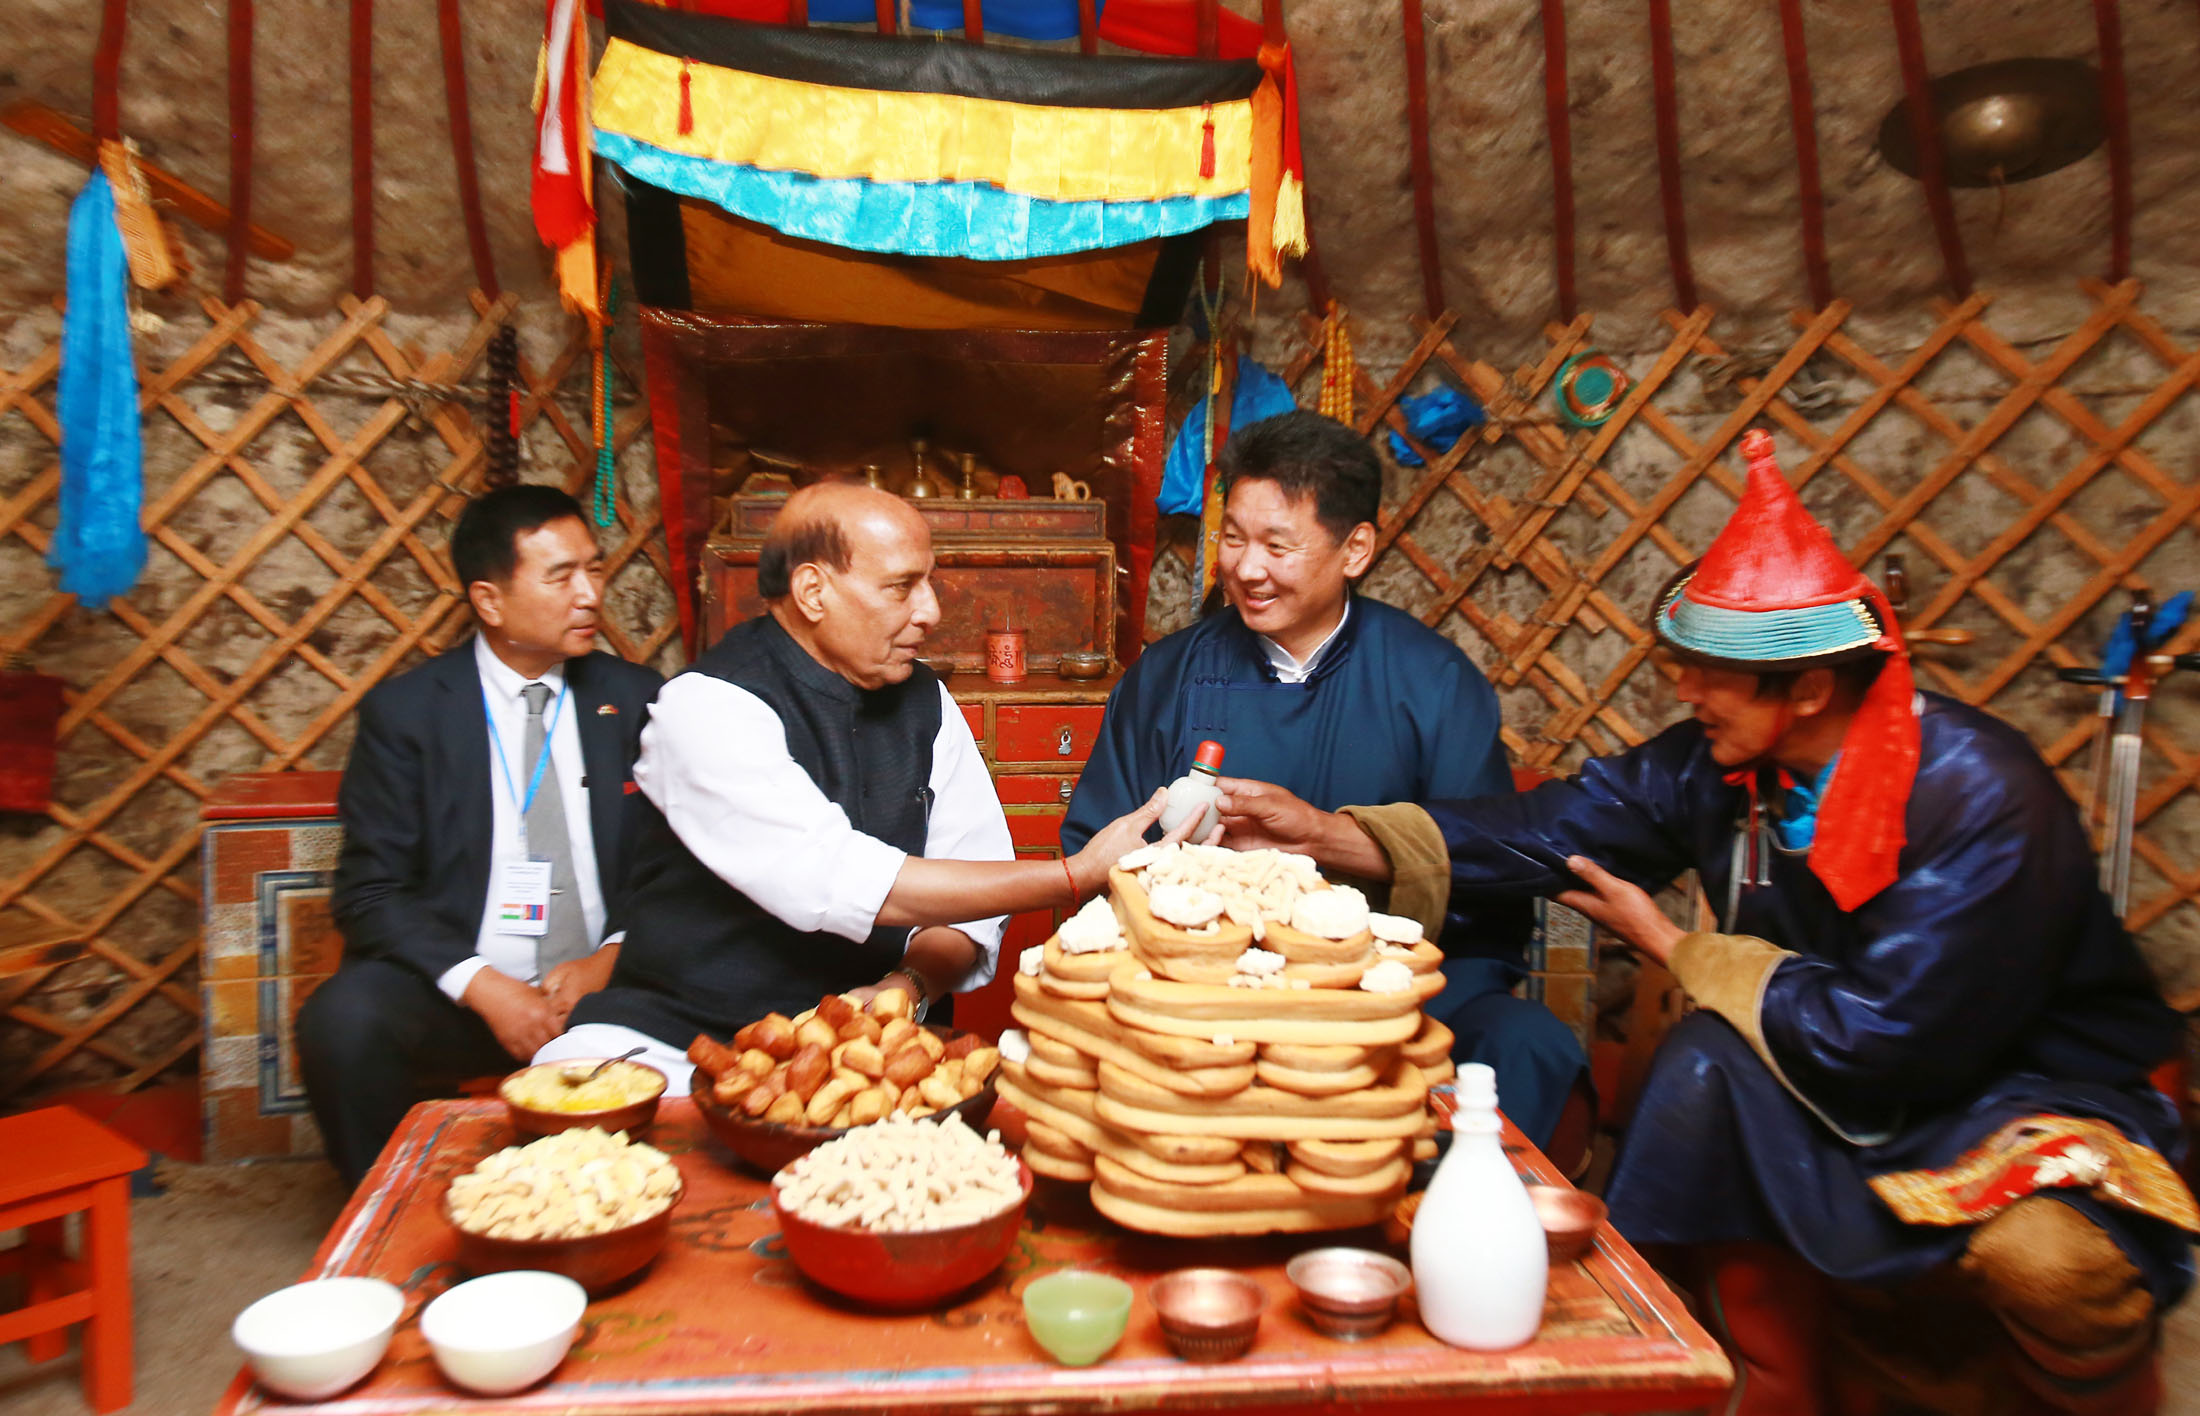 The Union Home Minister, Shri Rajnath Singh visiting the ‘Ger’ of a Nomadic Tribe family, in Mongolia on June 23, 2018. The Prime Minister of Mongolia, Mr. Ukhnaagin Khurelsukh is also seen.